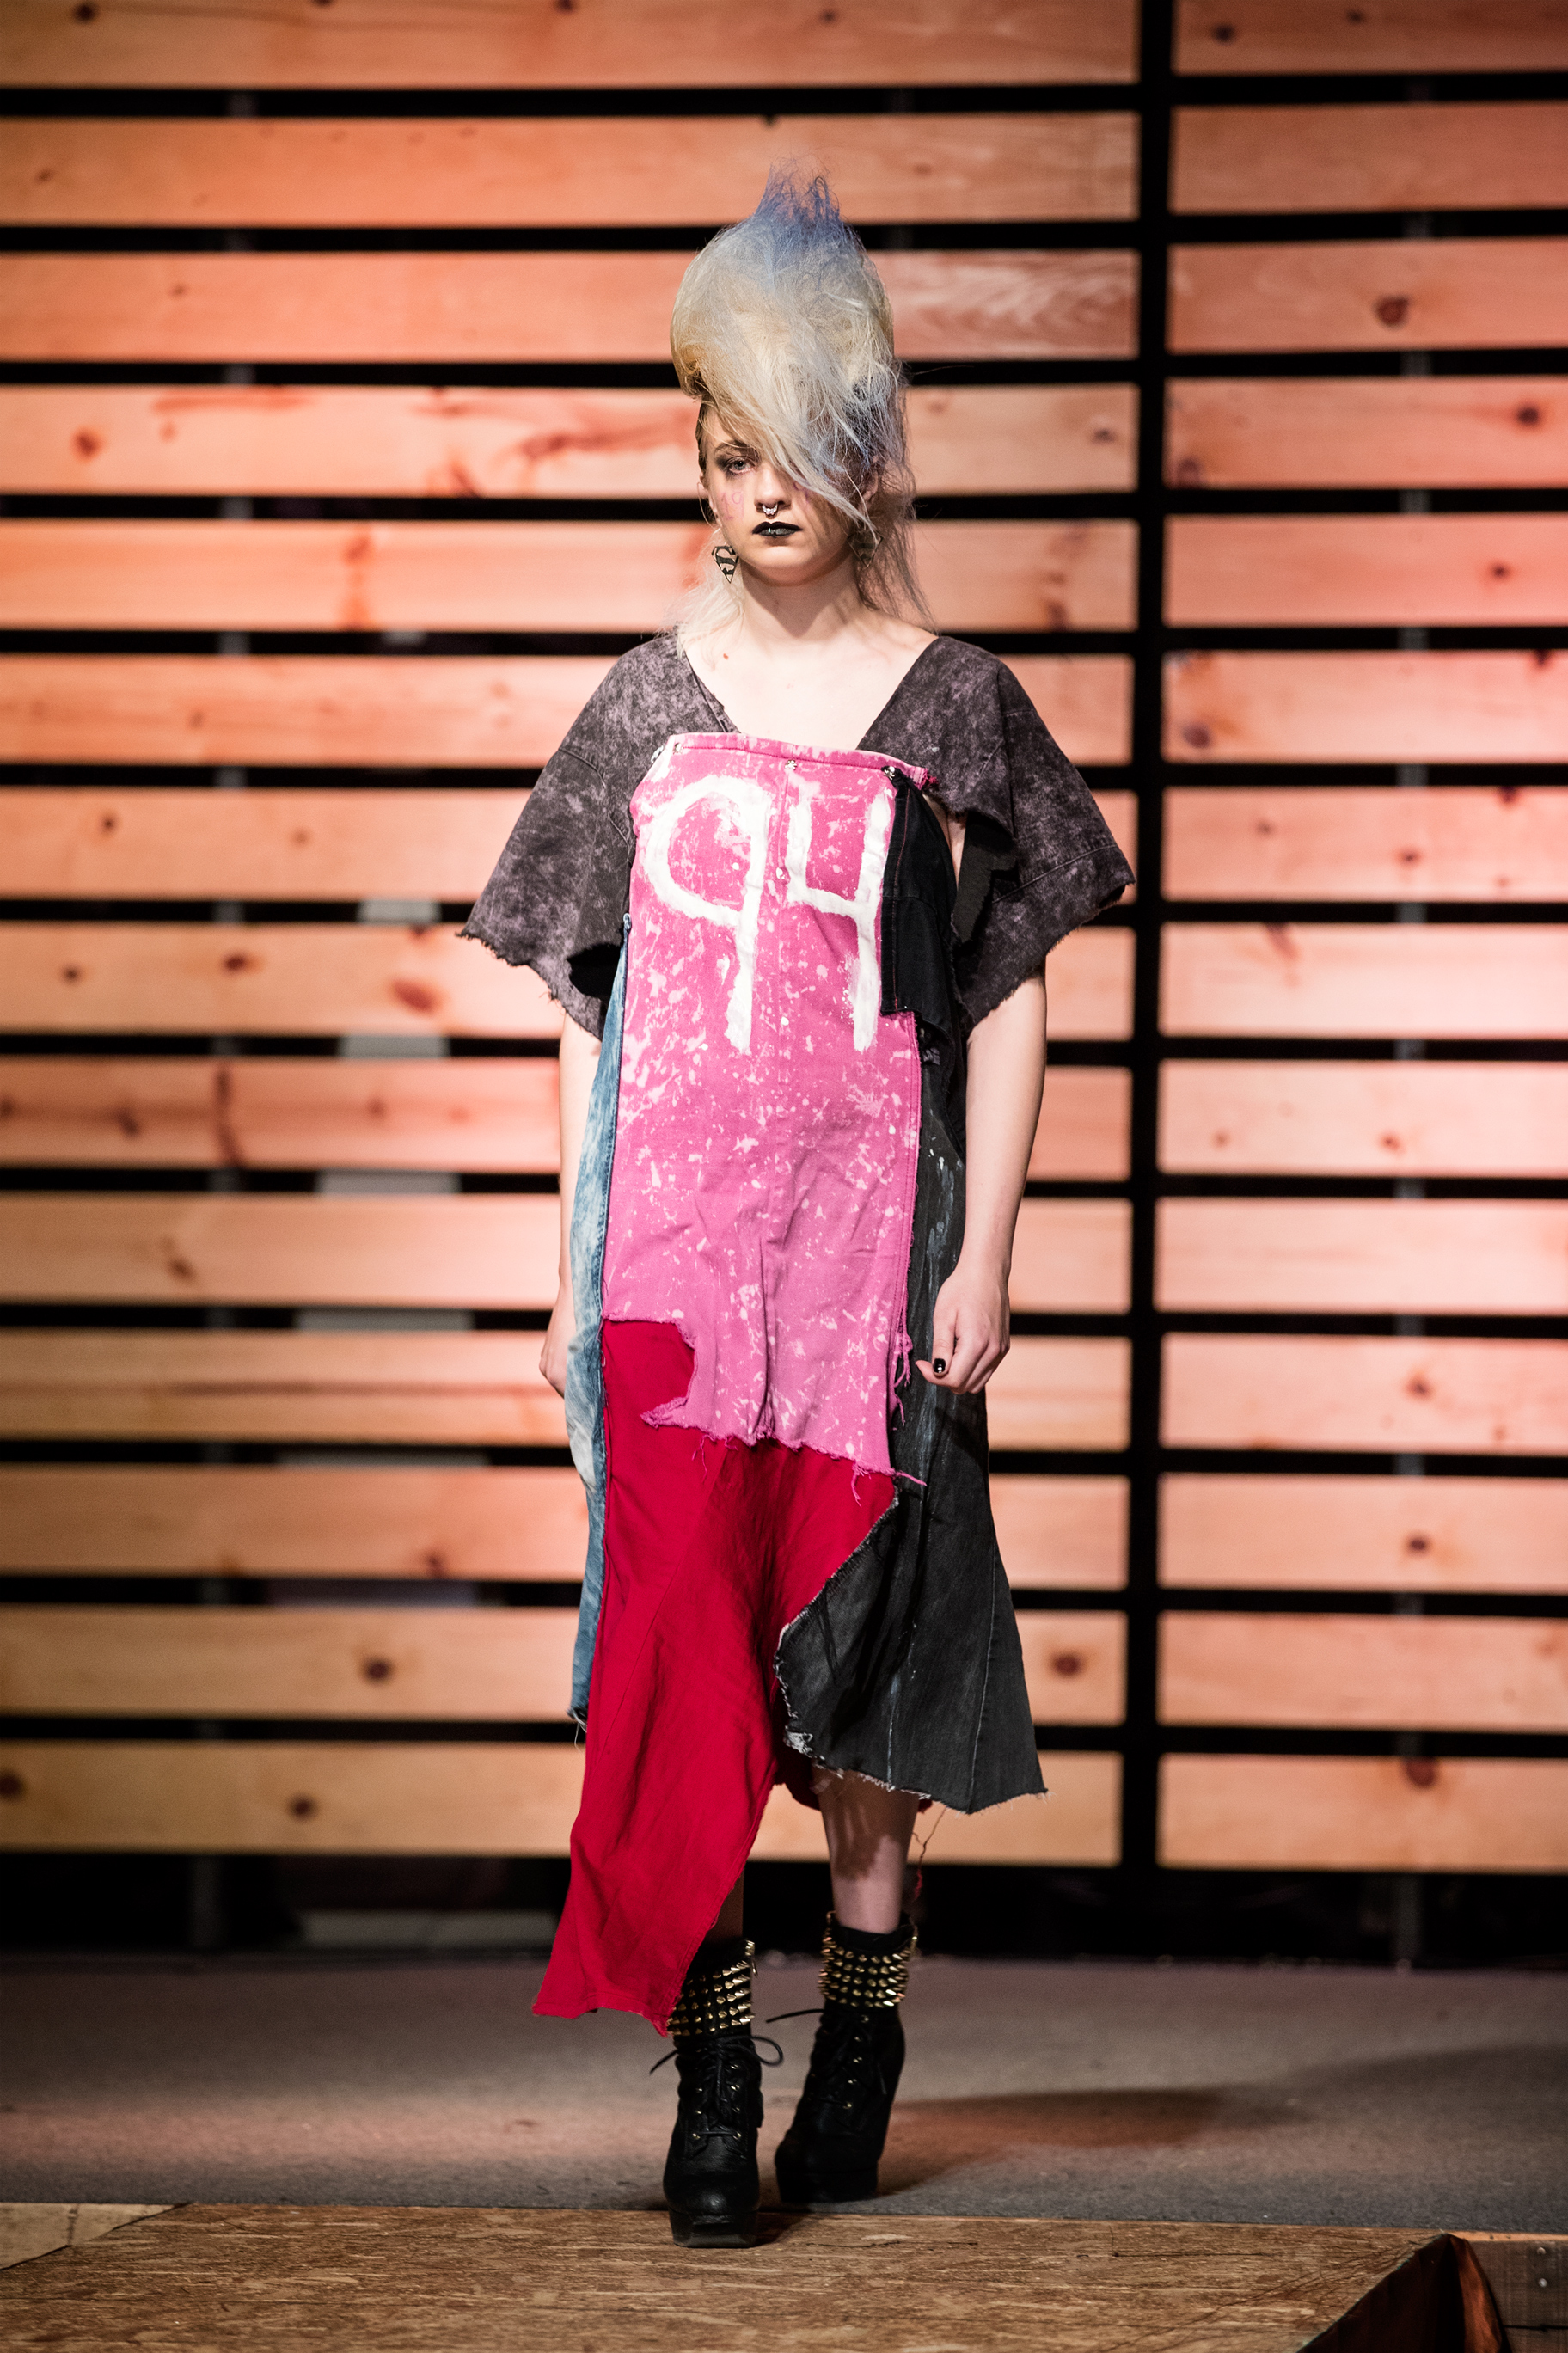 Mission Wear Upcycled Patchwork Fashion Show - 077.jpg